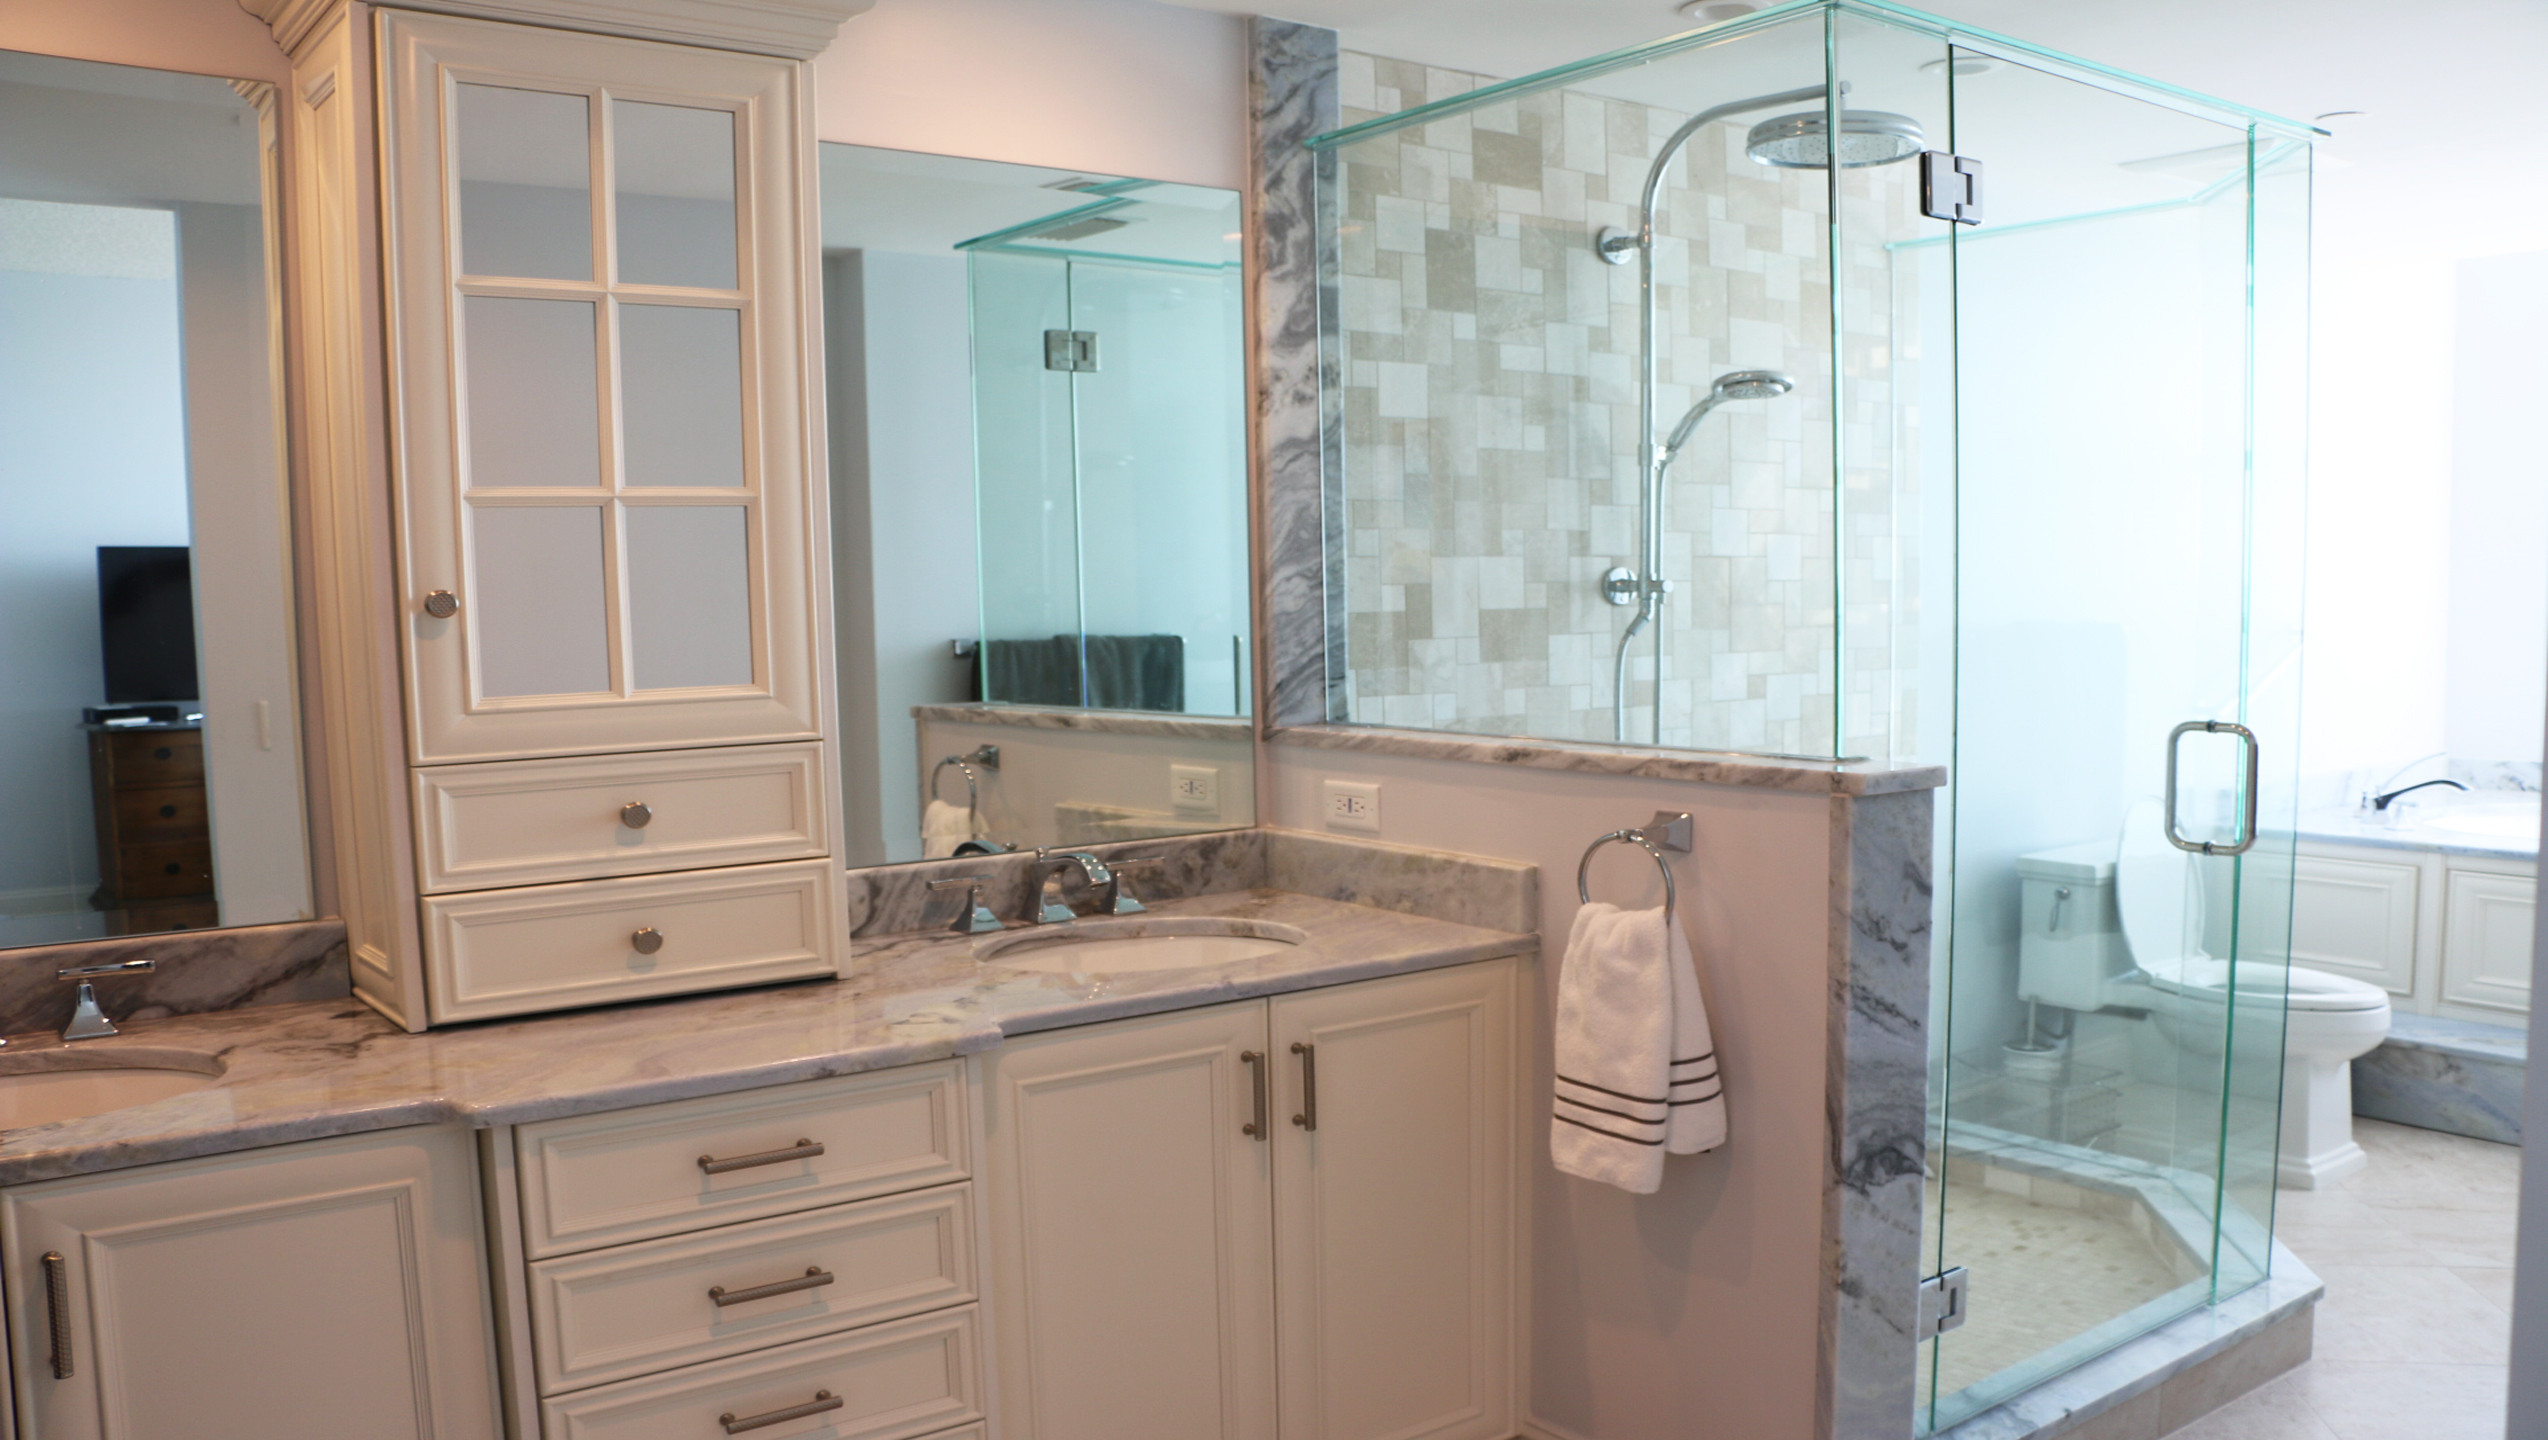 Bathroom Remodeling Clearwater Fl
 Ebie Construction Home Remodeling Home Repair fice